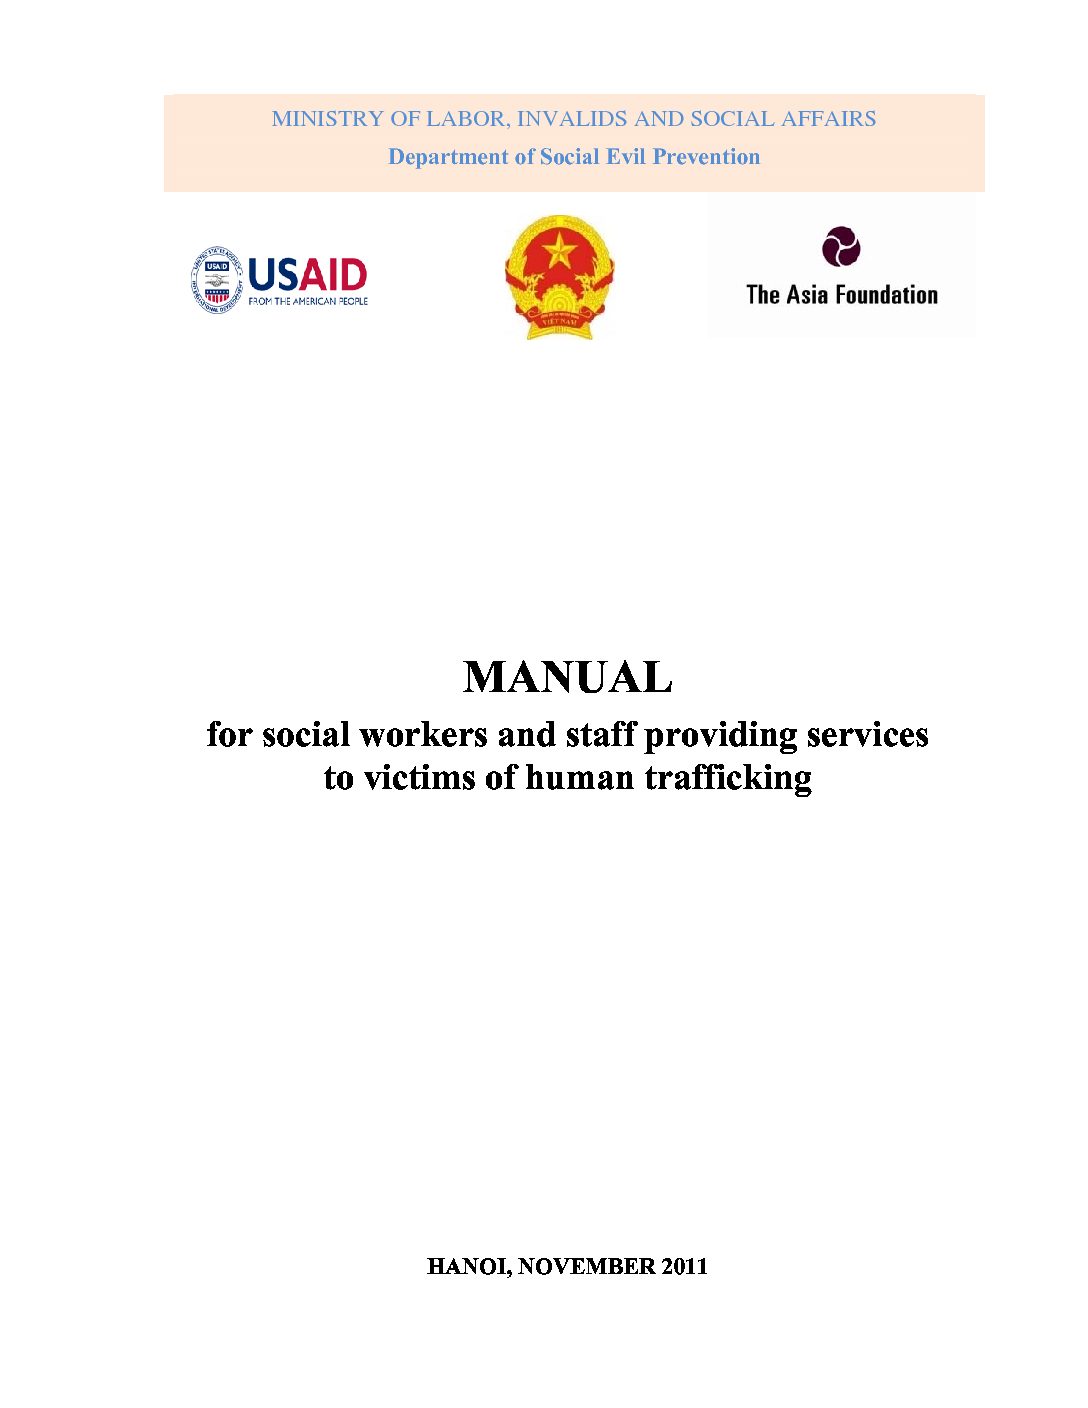 Manual for social workers and staff providing services to victims of human trafficking